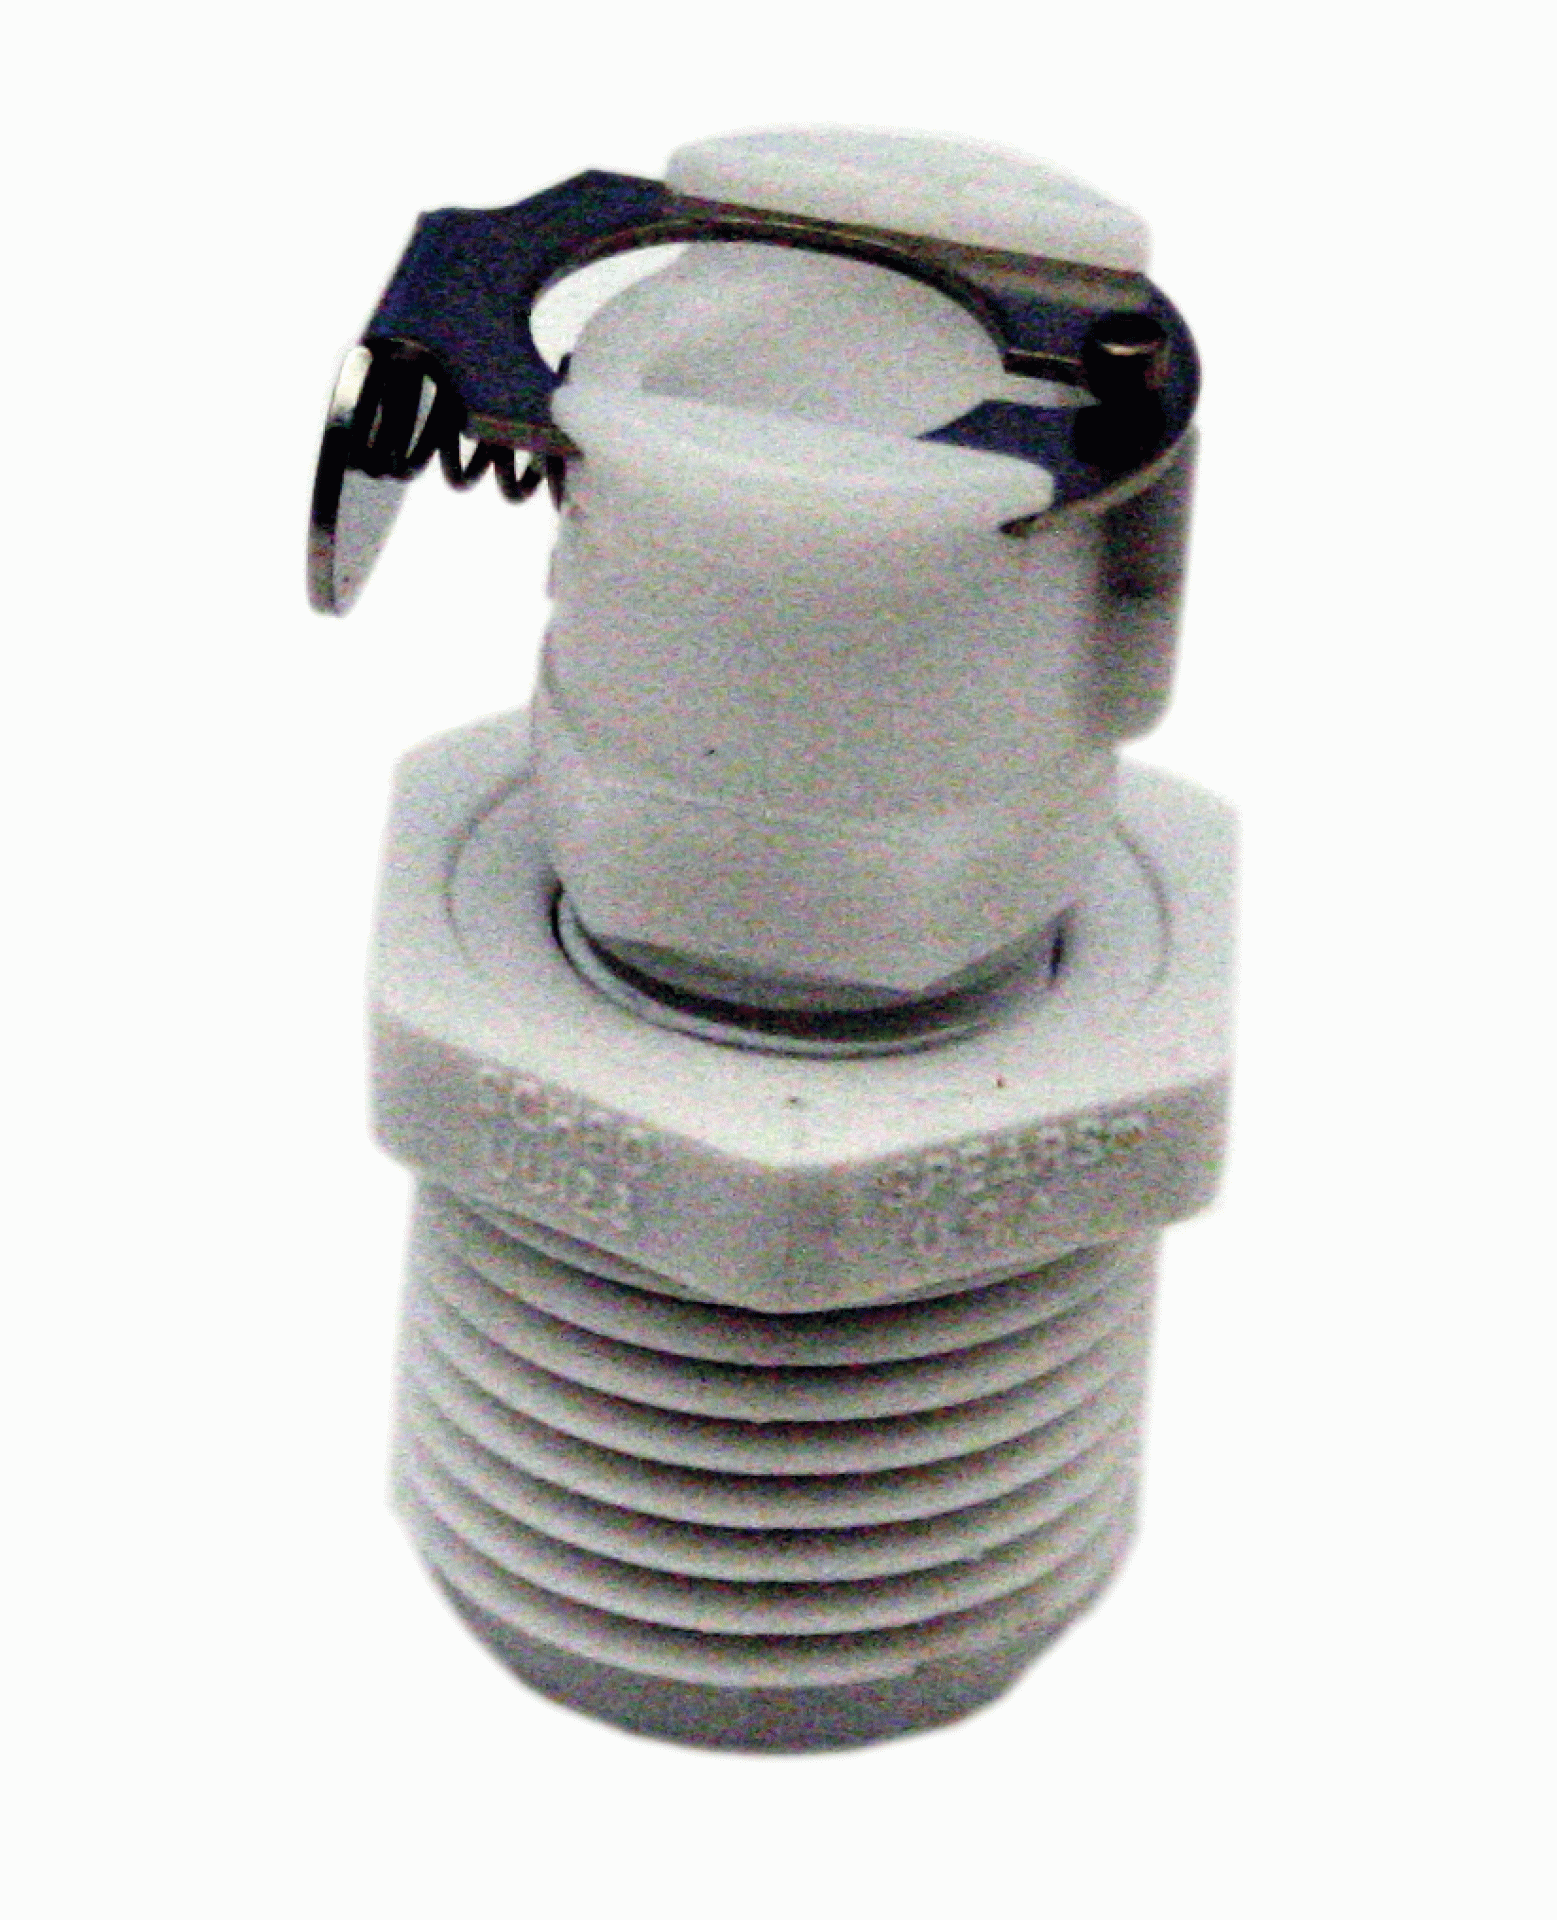 CAMCO MFG INC | 52531 | QUICK CONNECT COUPLING CLOSED W/ SHUTOFF